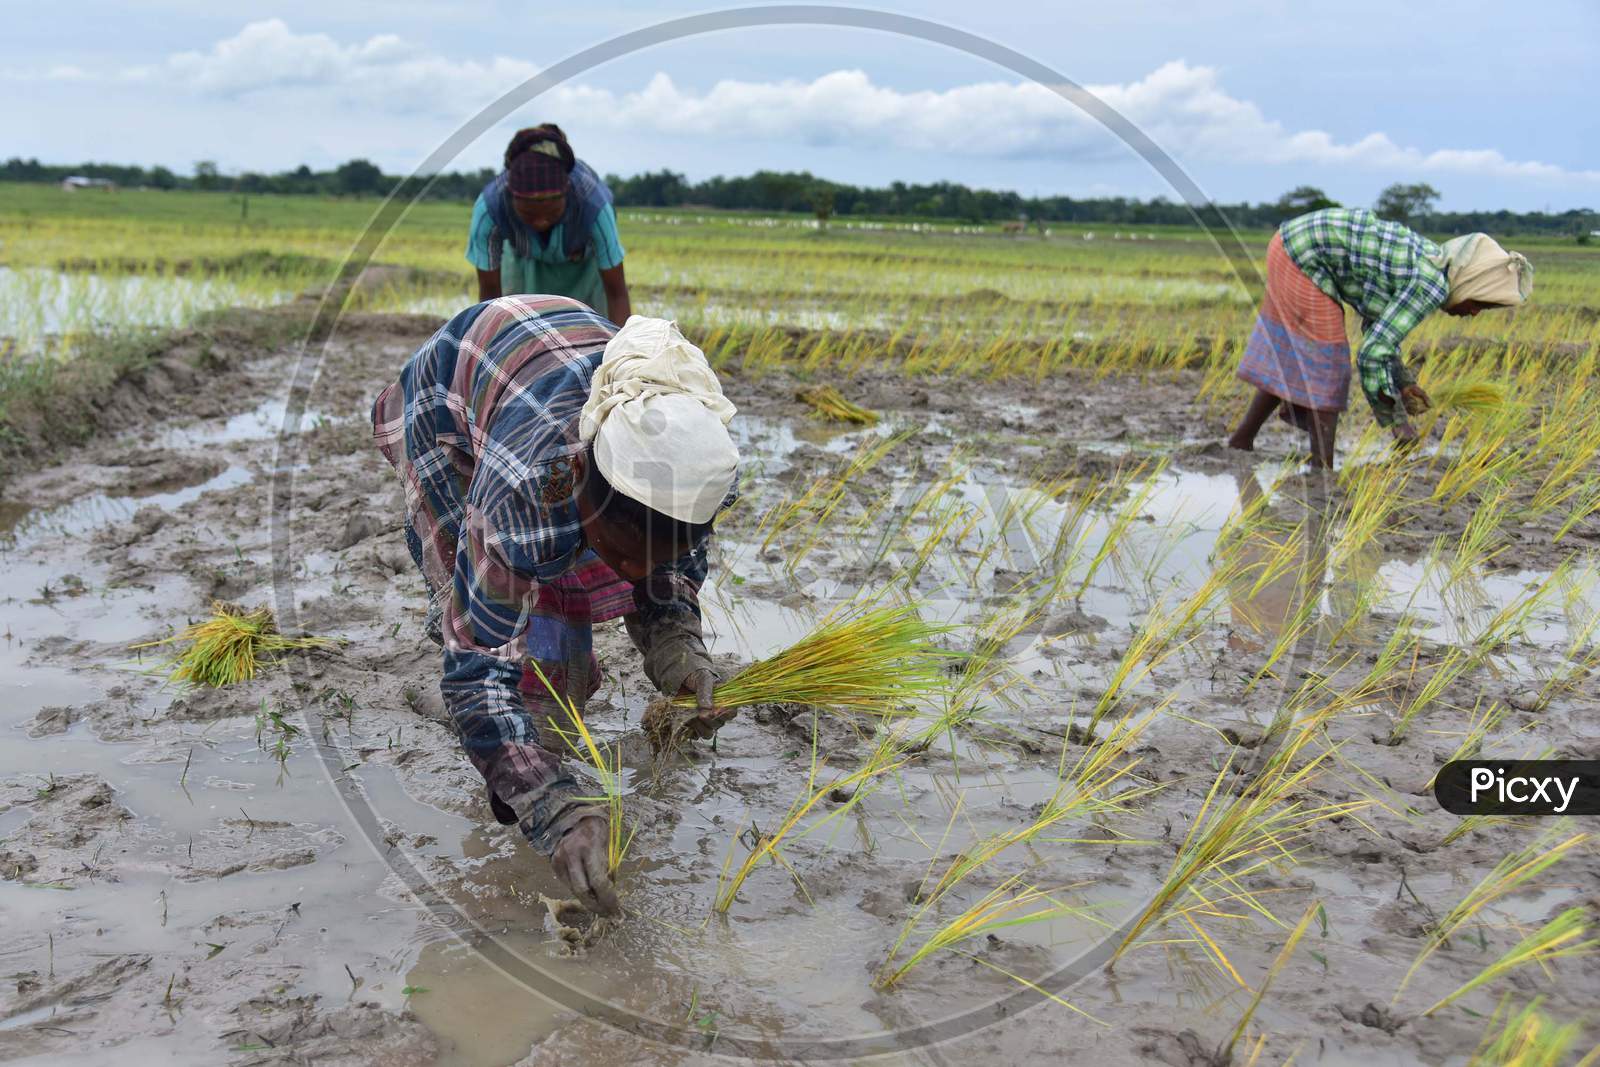 Farmers plant paddy saplings in a field at a village in Nagaon, Assam on July 11, 2020